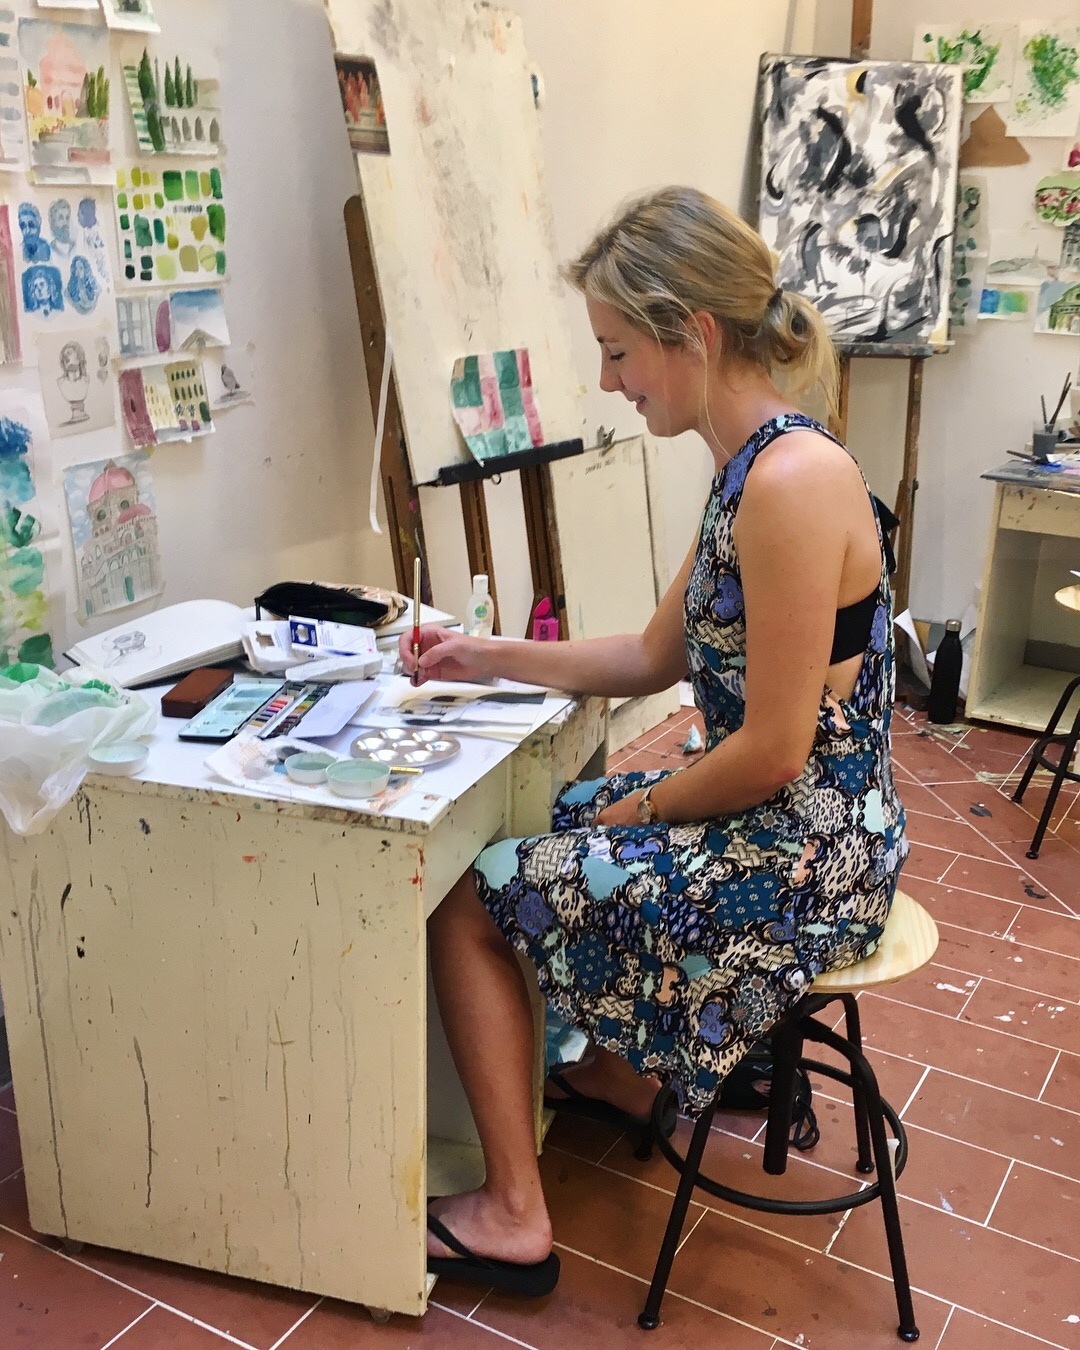 Blonde woman in a dress sitting at a desk, painting.